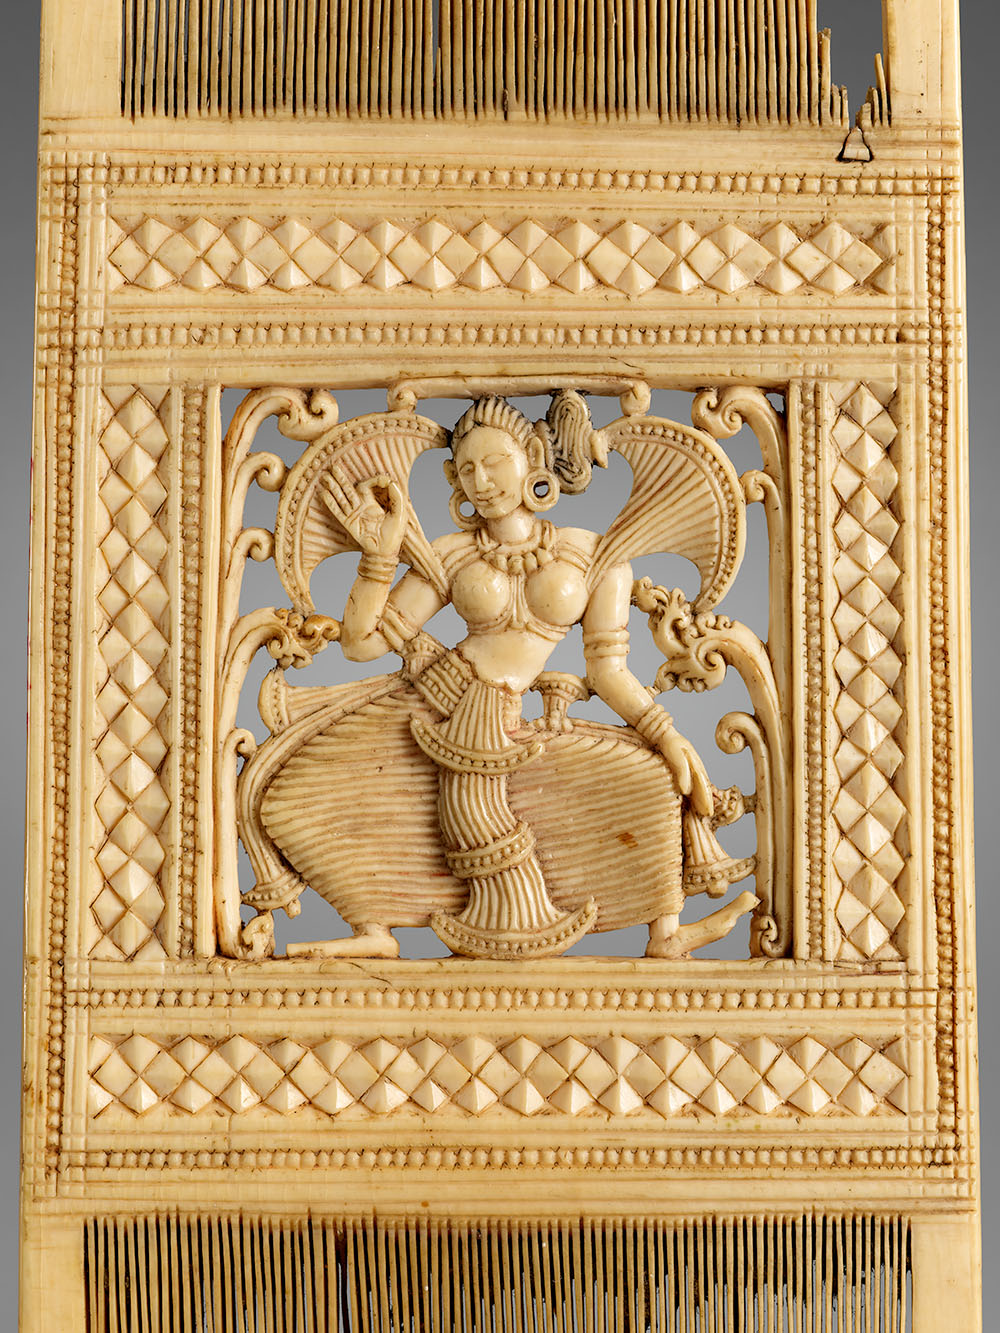 Comb with Dancing Woman, circa 1600-1700, Sri Lanka; Kandy, ivory with traces of paint, Asian Art Museum in San Francisco, The Avery Brundage Collection, B60M345